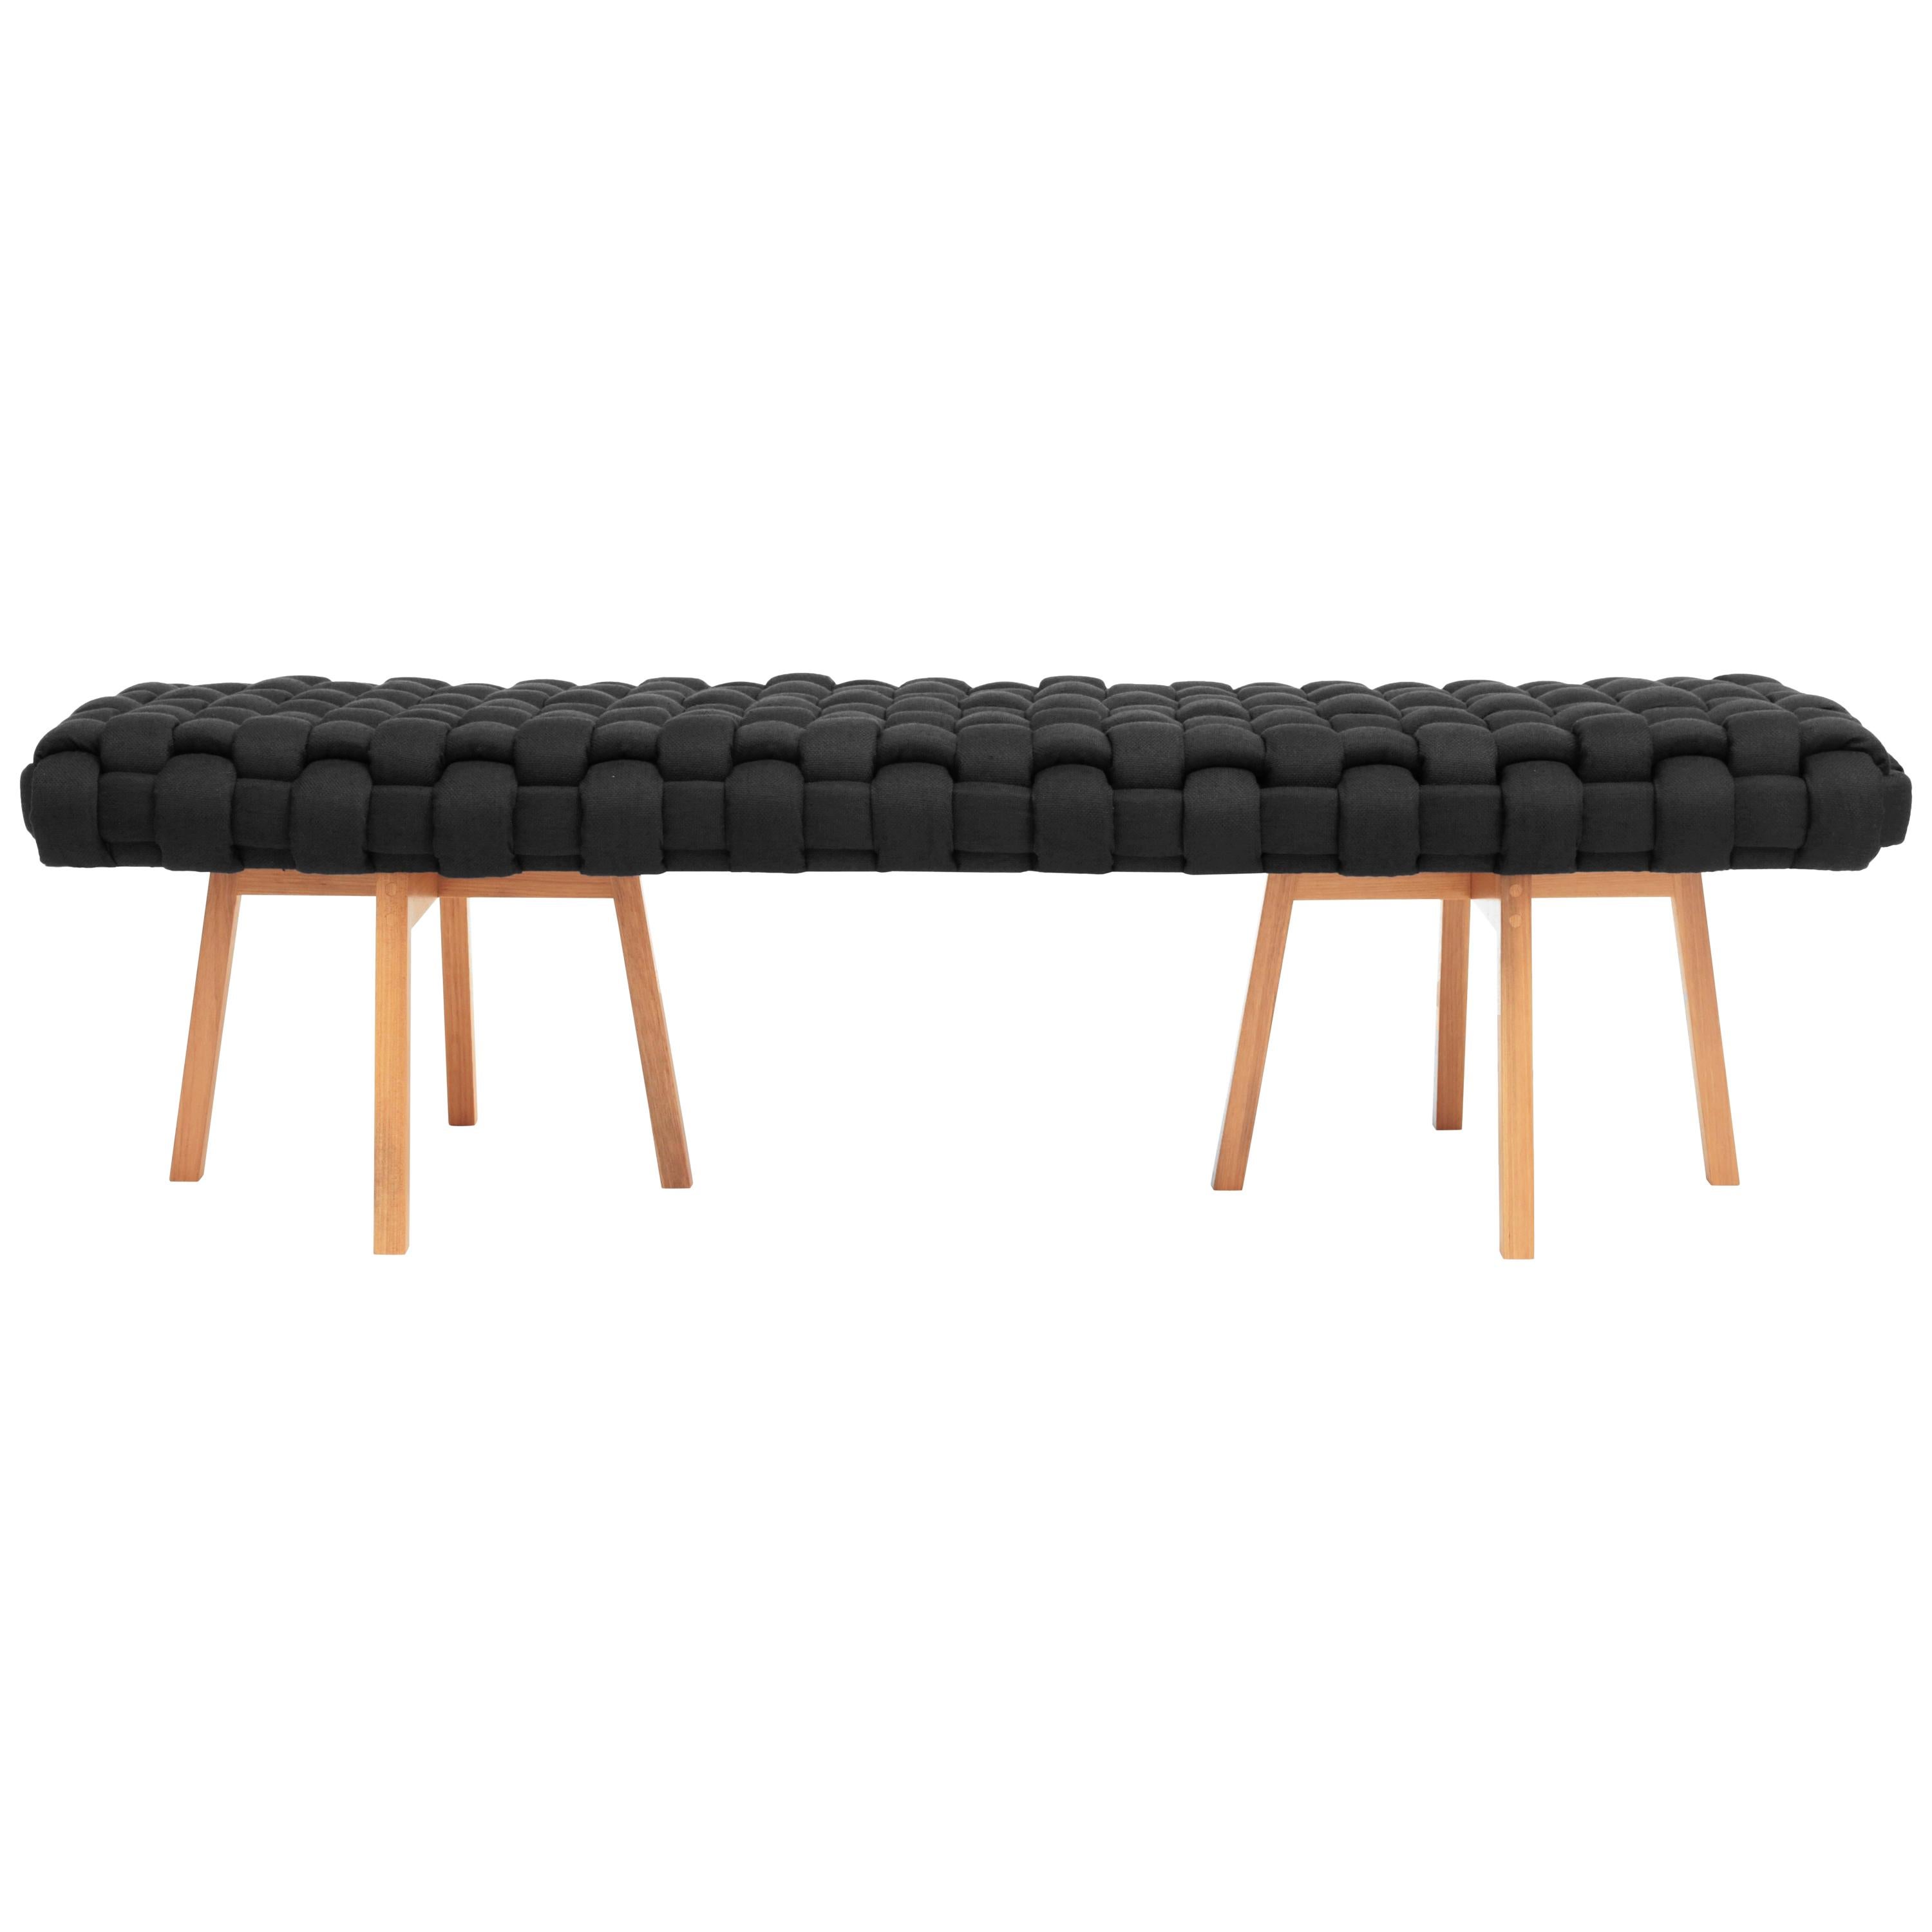 Contemporary Wood Bench, Handwoven Upholstery, the "Trama", Black